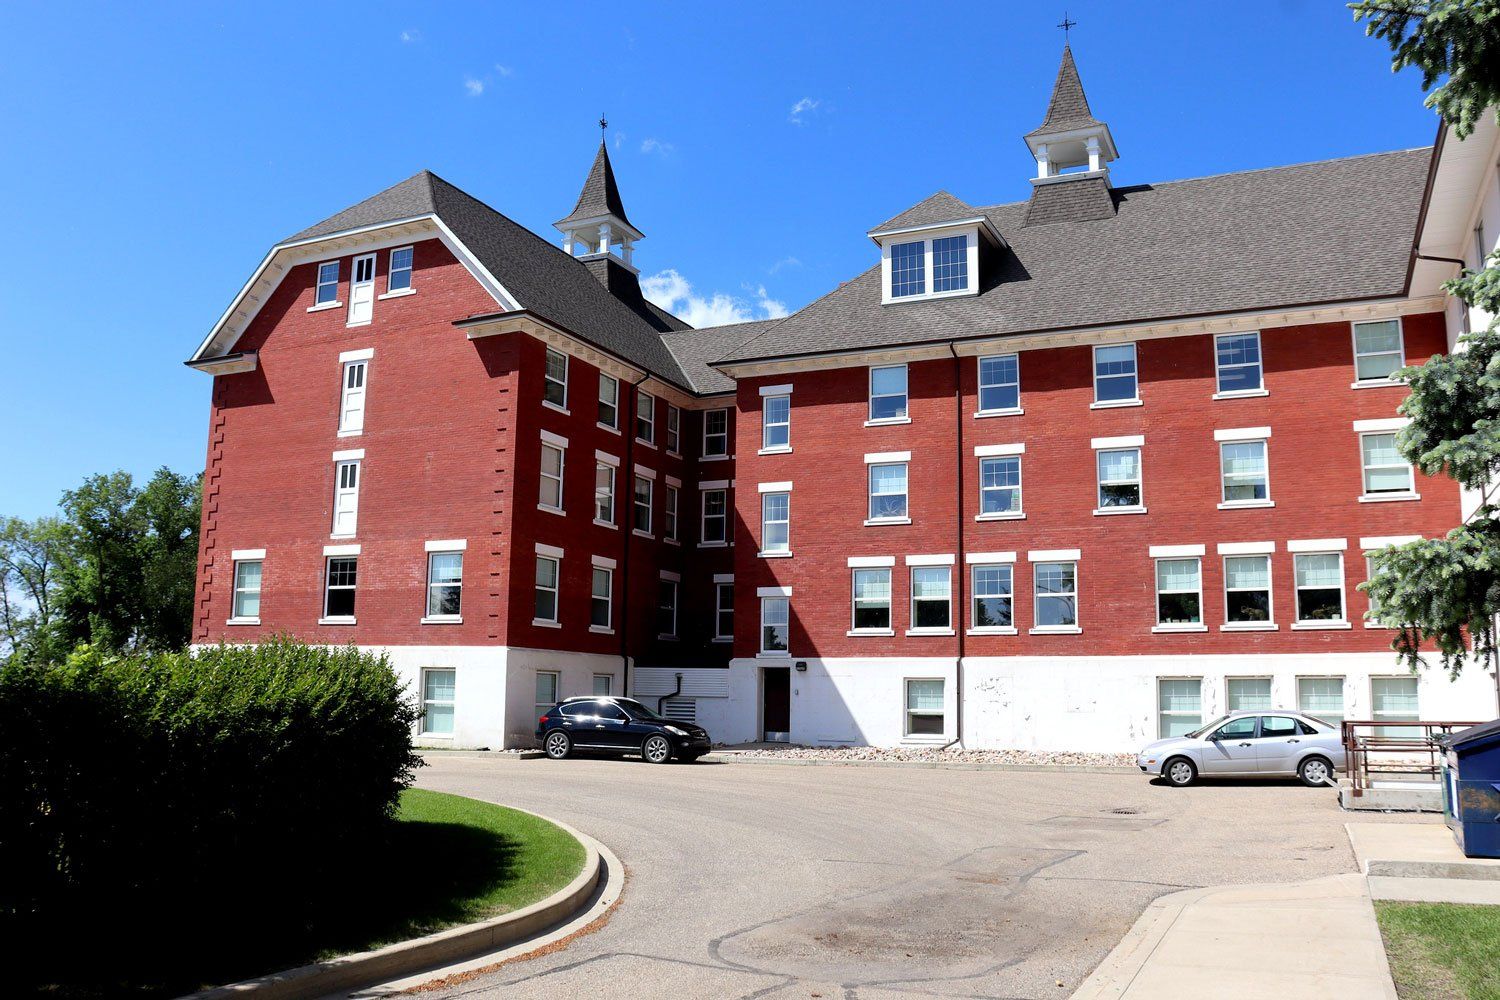 The main building of the Michener Centre in Red Deer, Alberta. It is a four storey red brick building with a peaked roof and two spires. The Michener Centre is the only large institution for people with intellectual/developmental disabilities in Canada that has no planned closure date. Image taken by Jason Woodhead, licensed under Creative Commons 2.0 (https://creativecommons.org/licenses/by/2.0/).